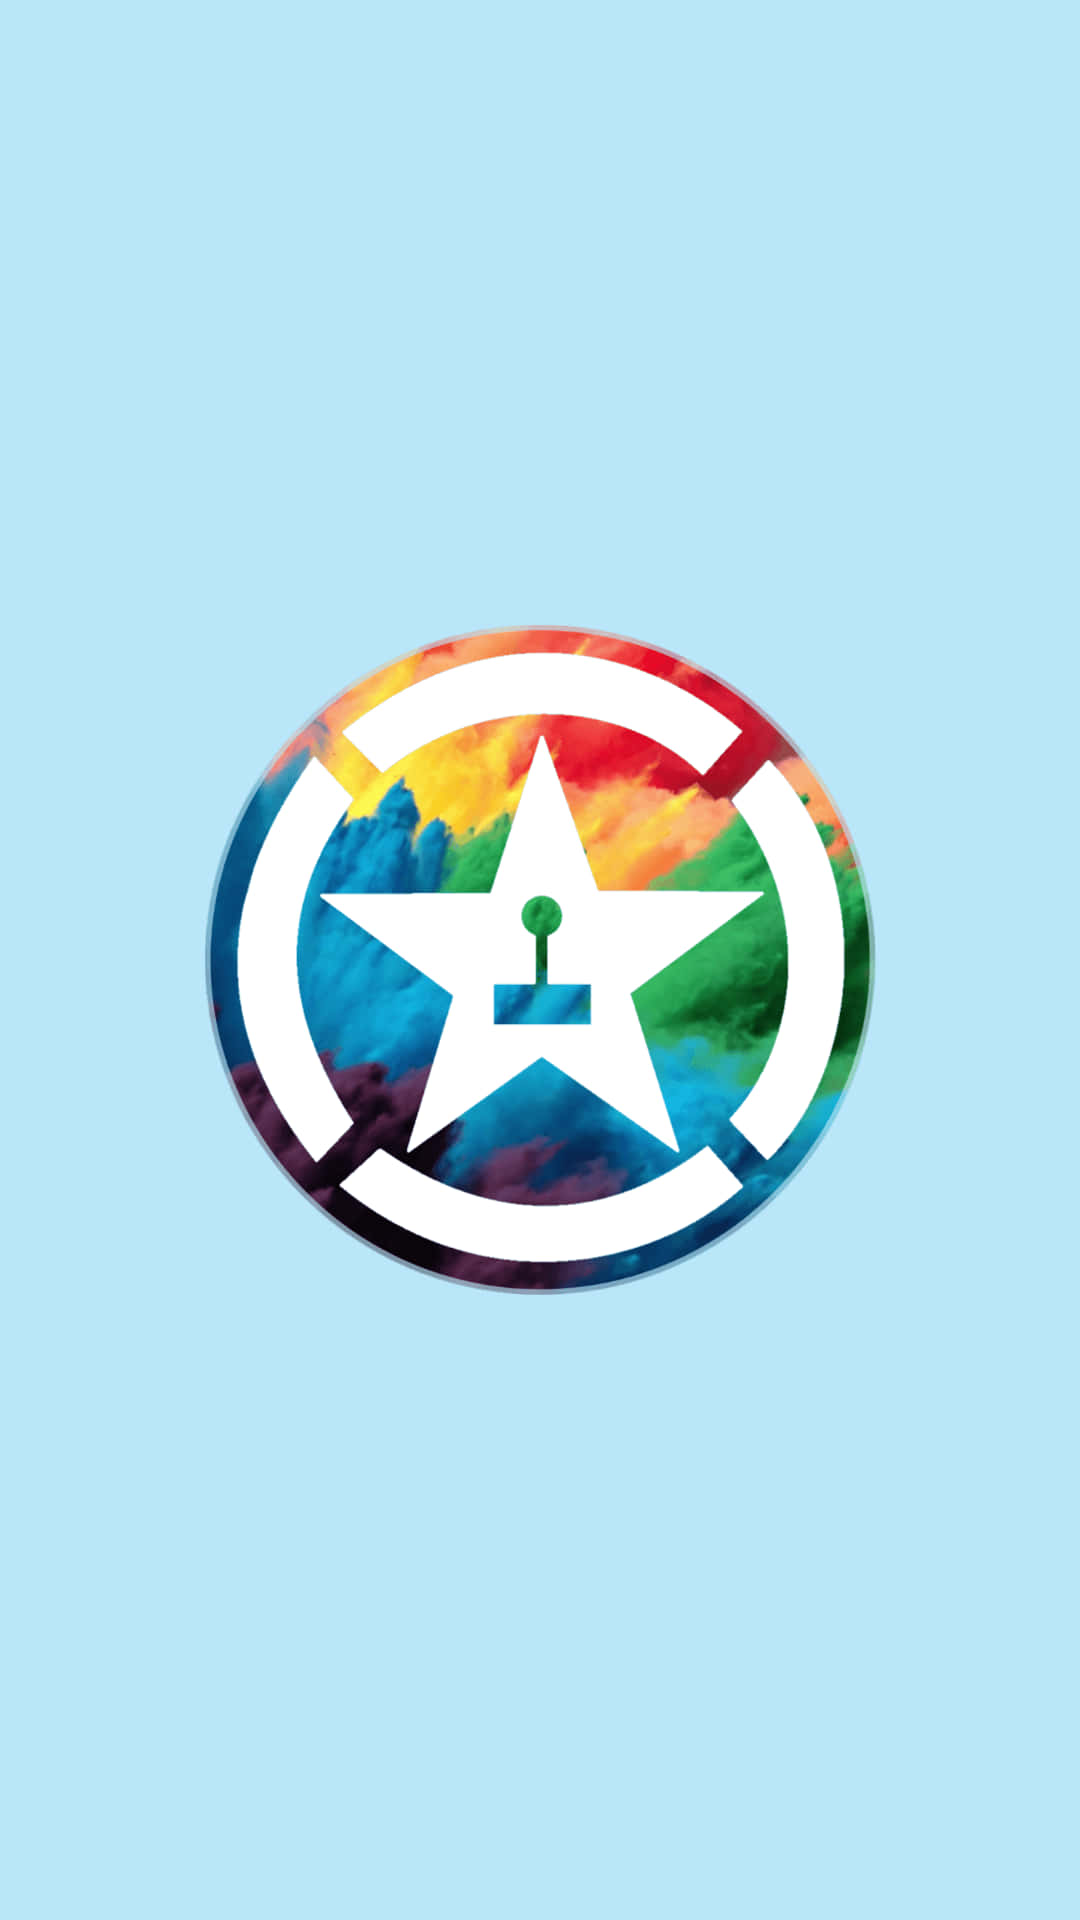 A Star Logo With A Rainbow Background Wallpaper